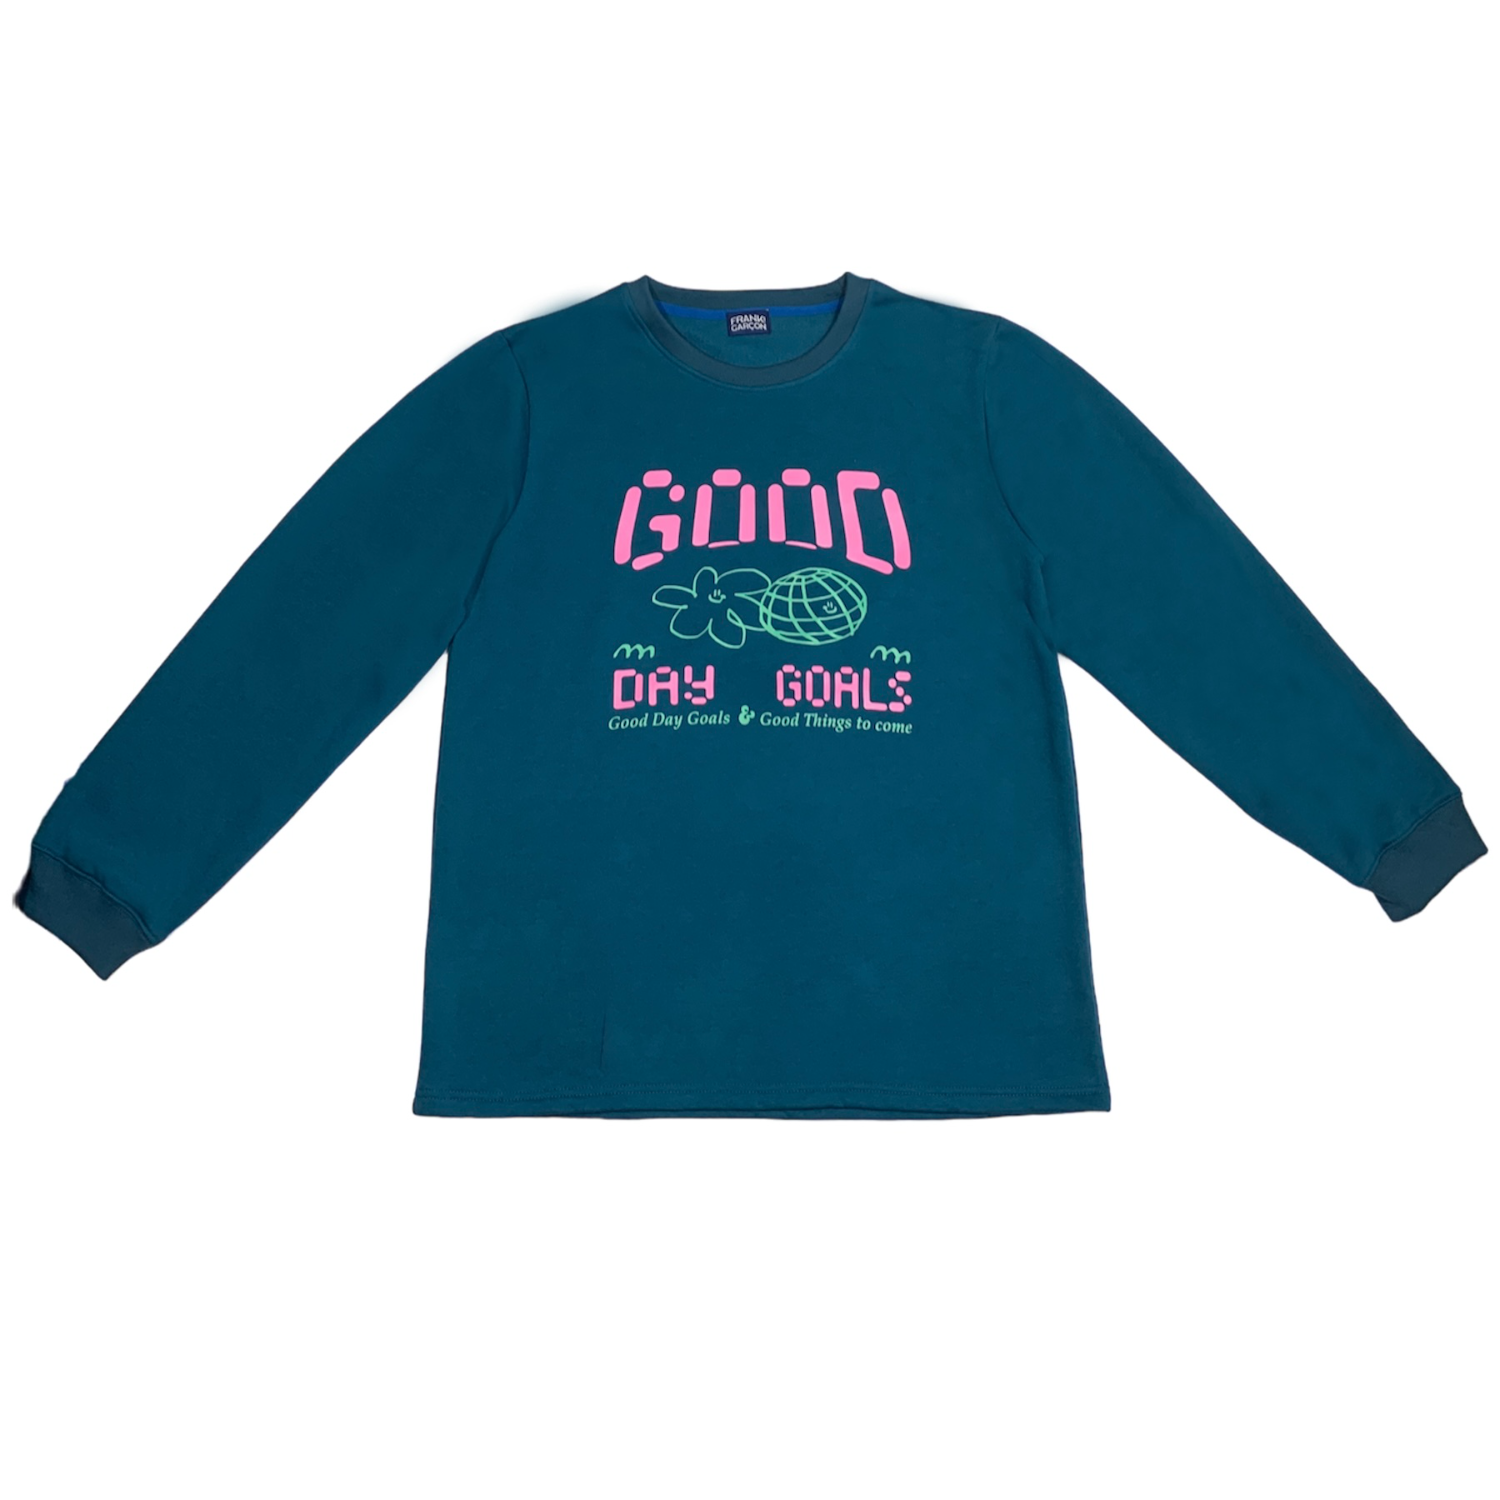 Good Day Goal Sweater (Blue)